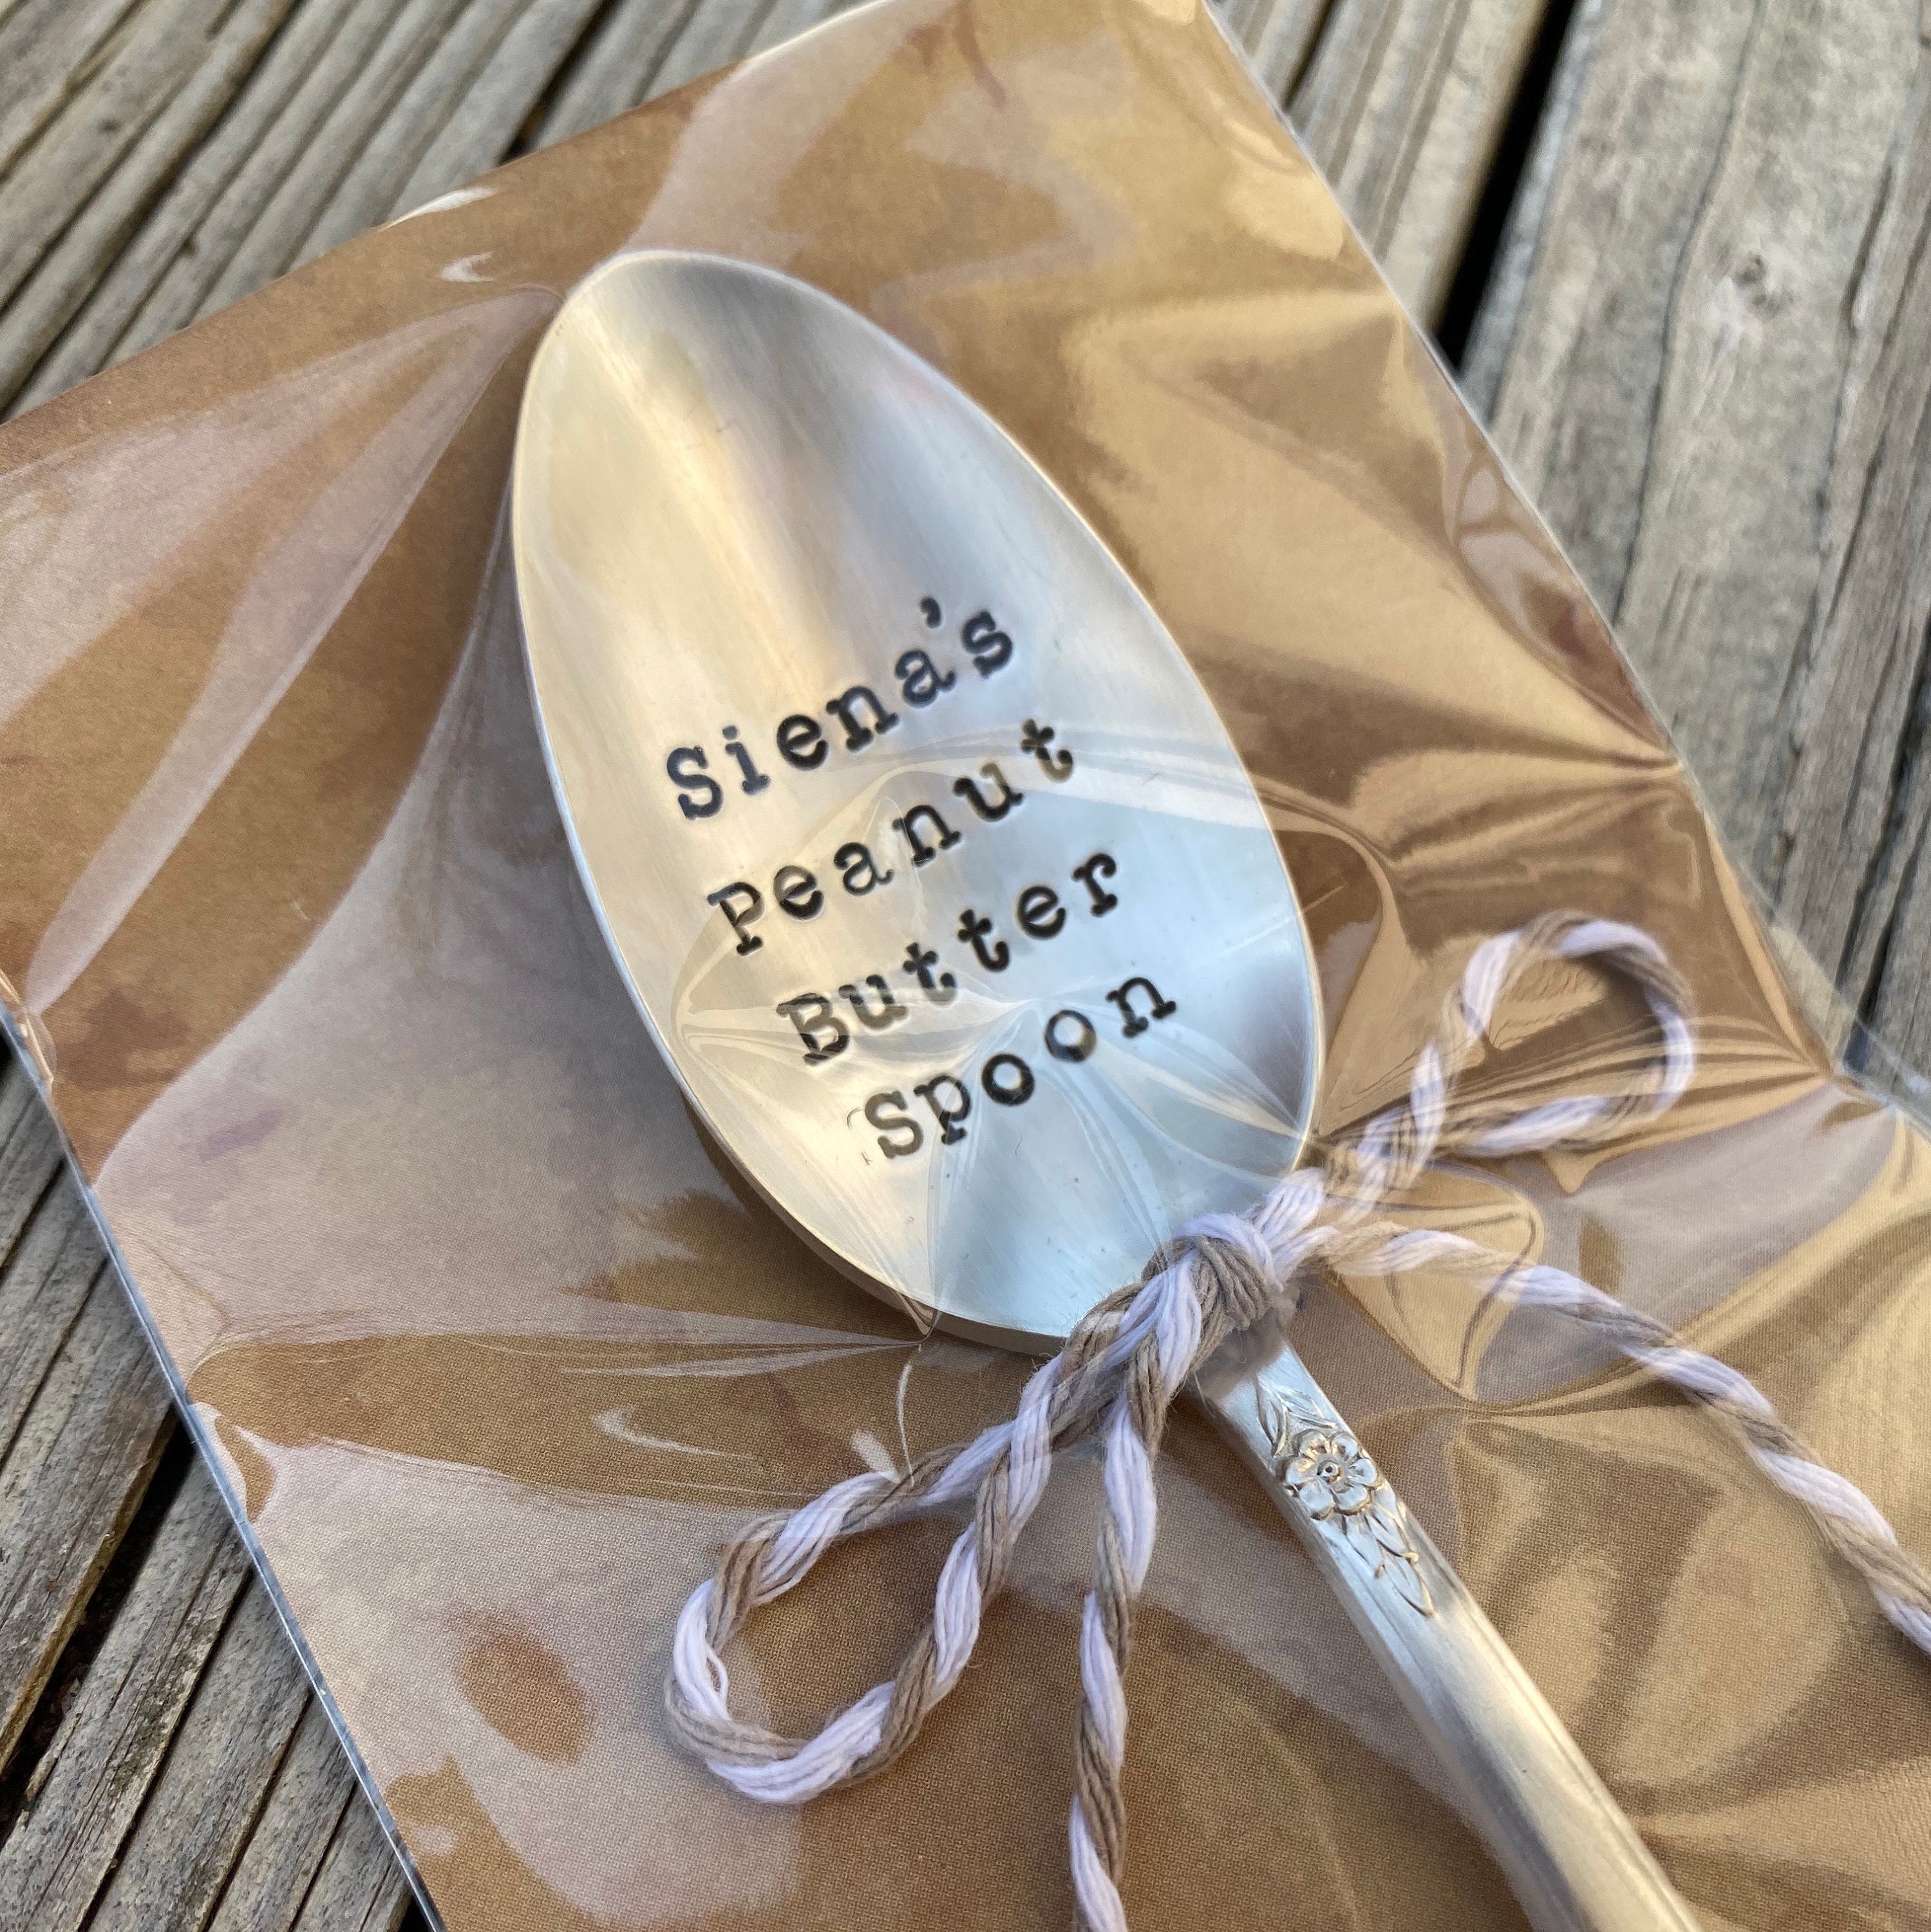 Personalized Peanut Butter Spoon – redesigned spoons